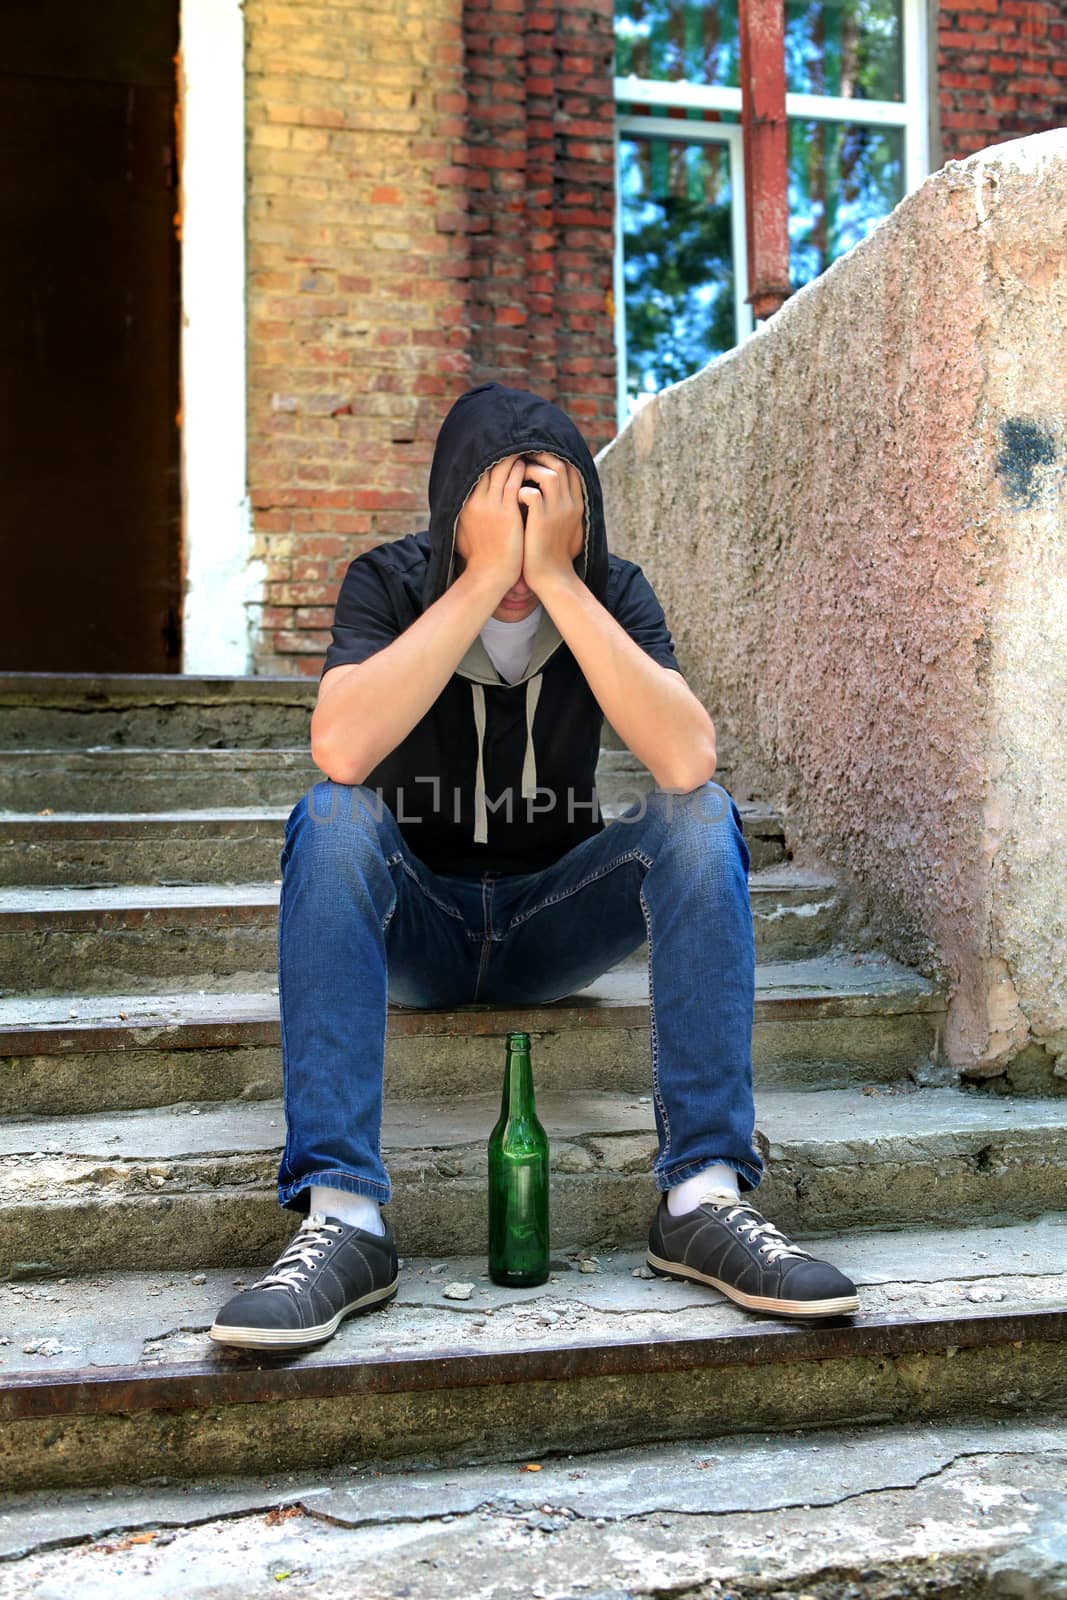 Sad Teenager on the landing steps with a Bottle of the Beer